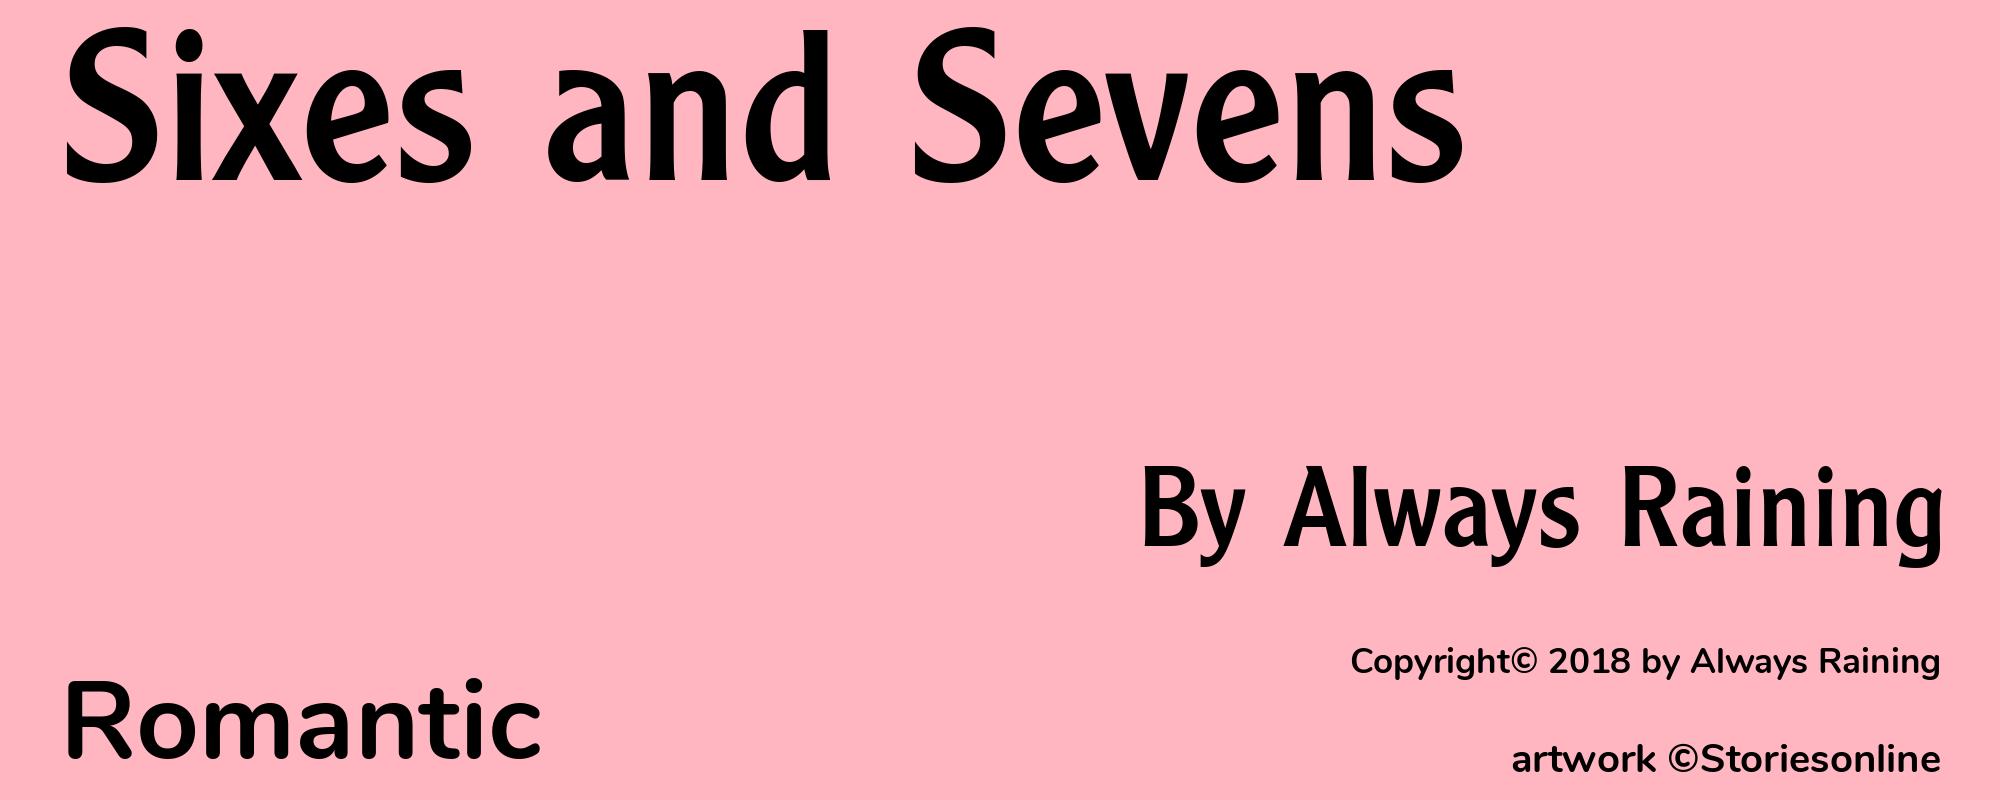 Sixes and Sevens - Cover